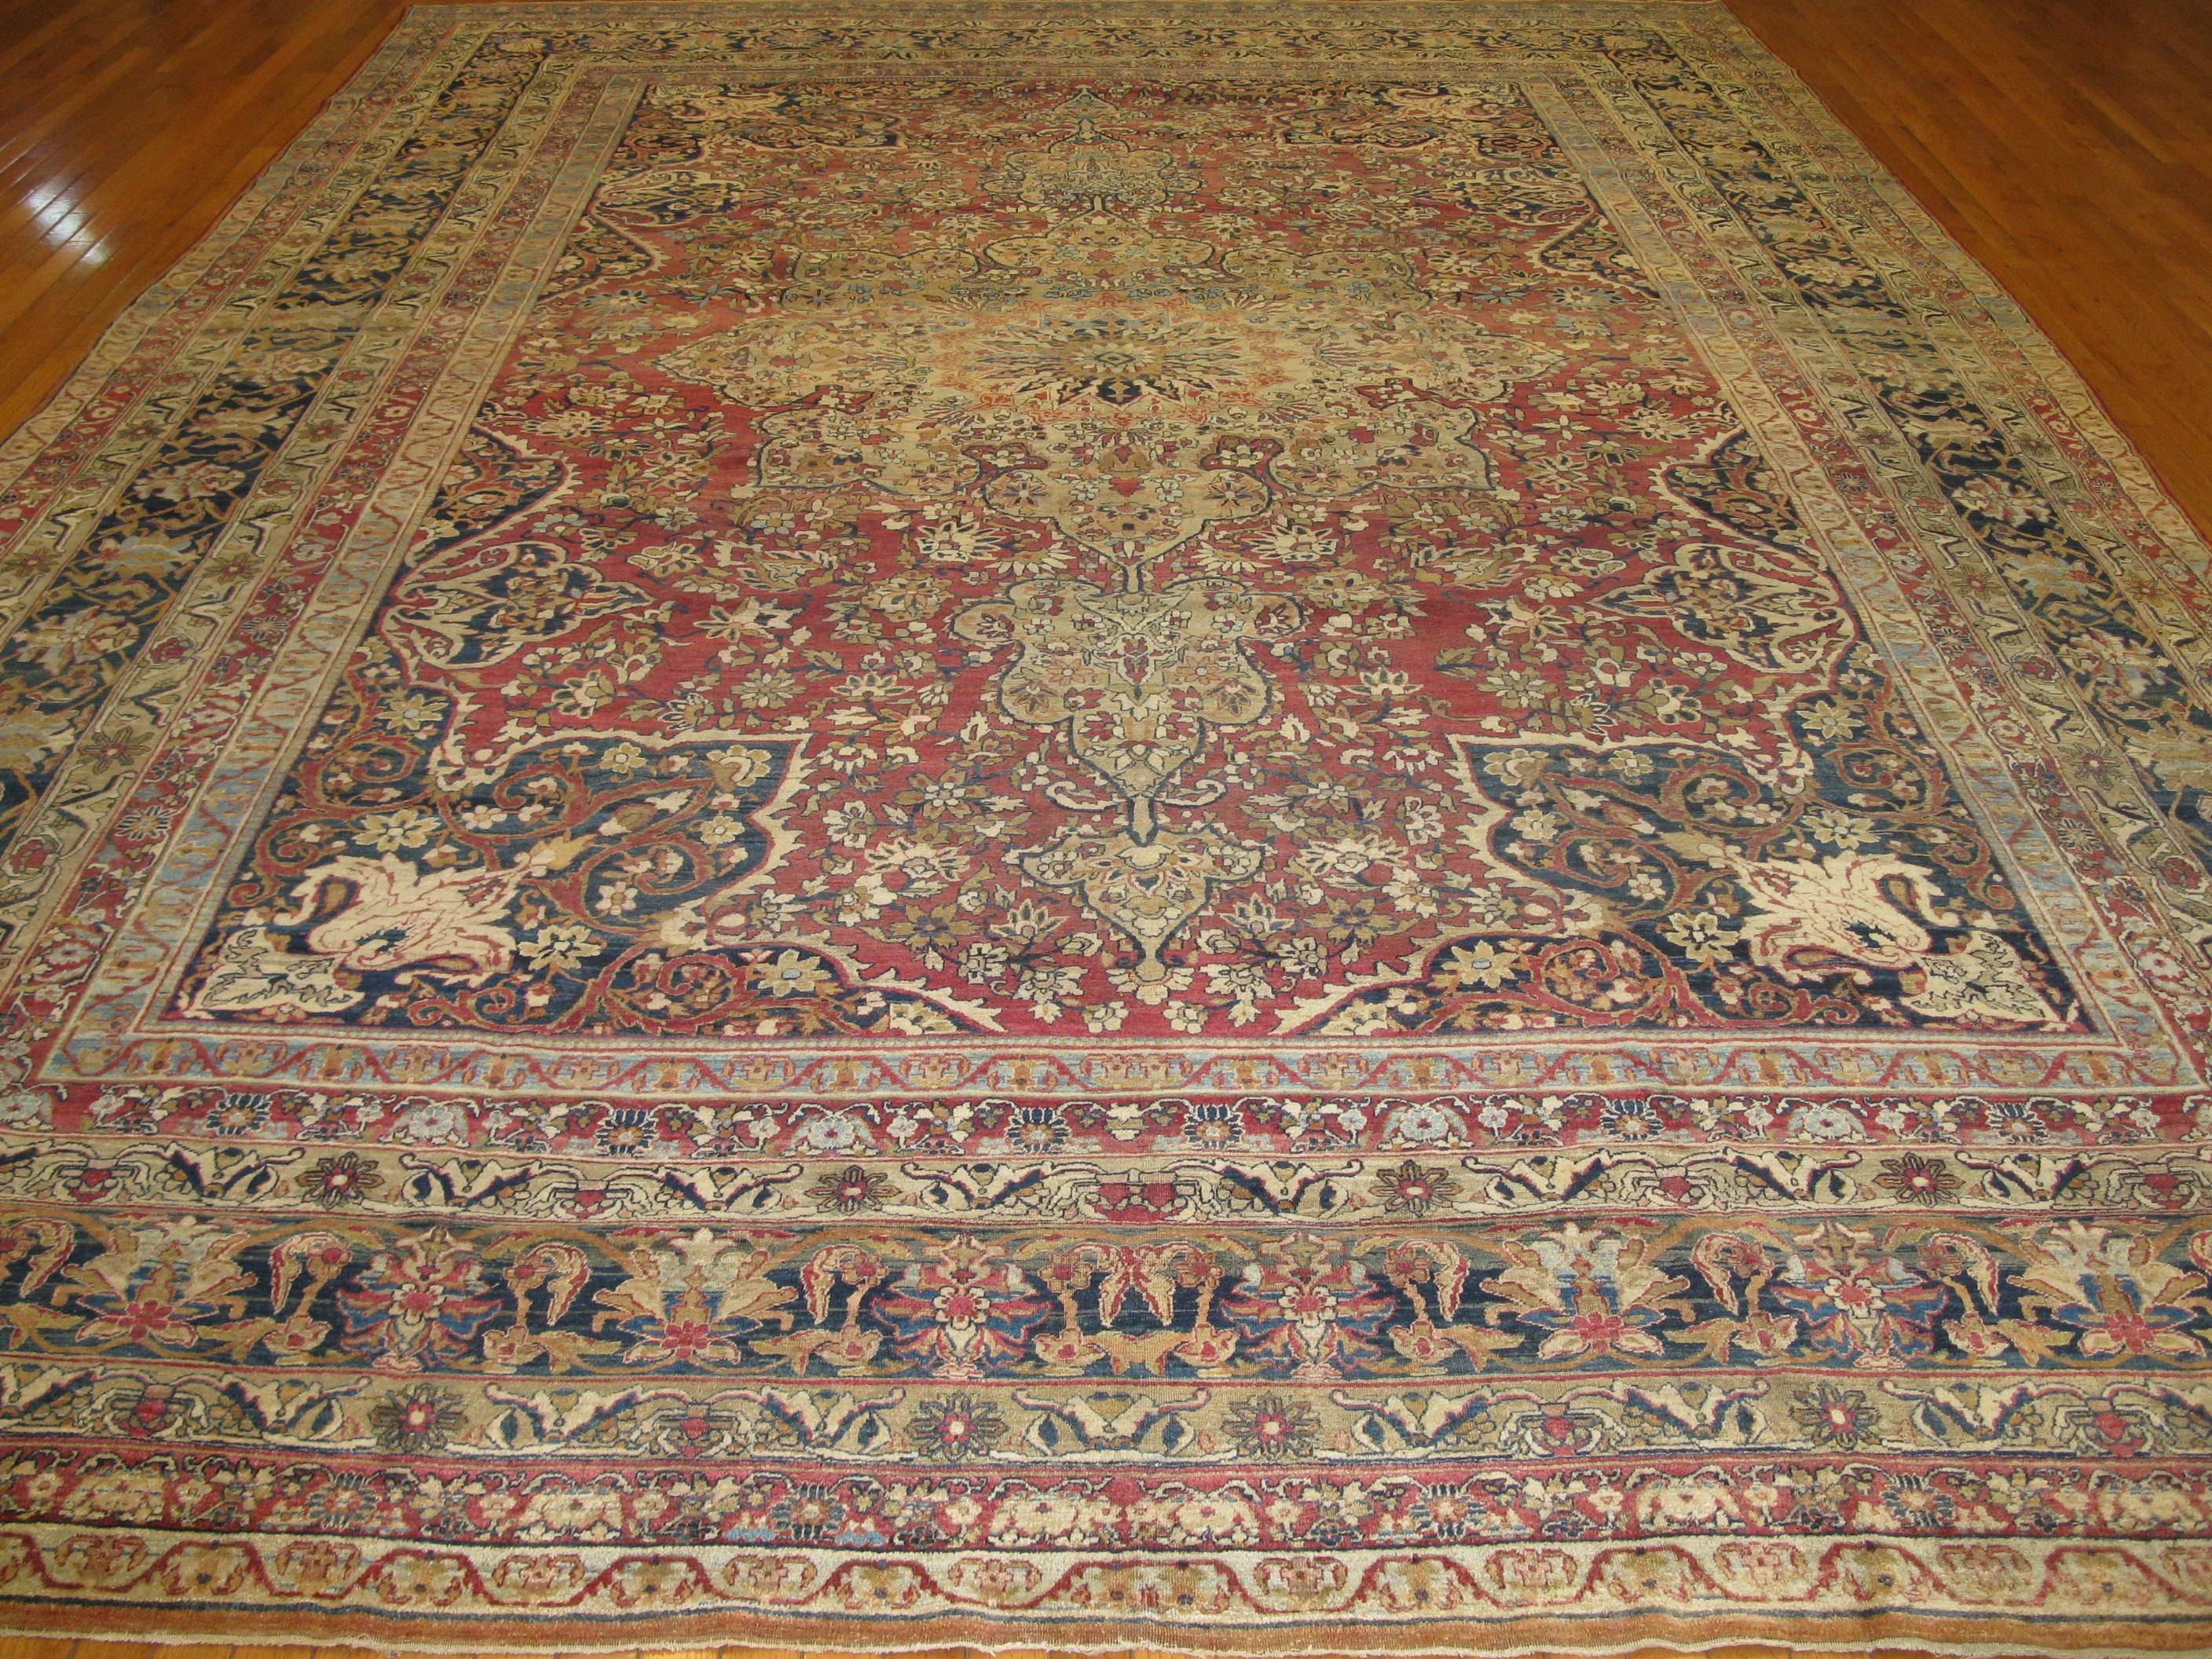 This is a beautiful large room size antique hand-knotted rug from the infamous Lavar Kerman in Iran (Persian). The rug is in excellent condition and measures 10' 3'' x 14' 6''.